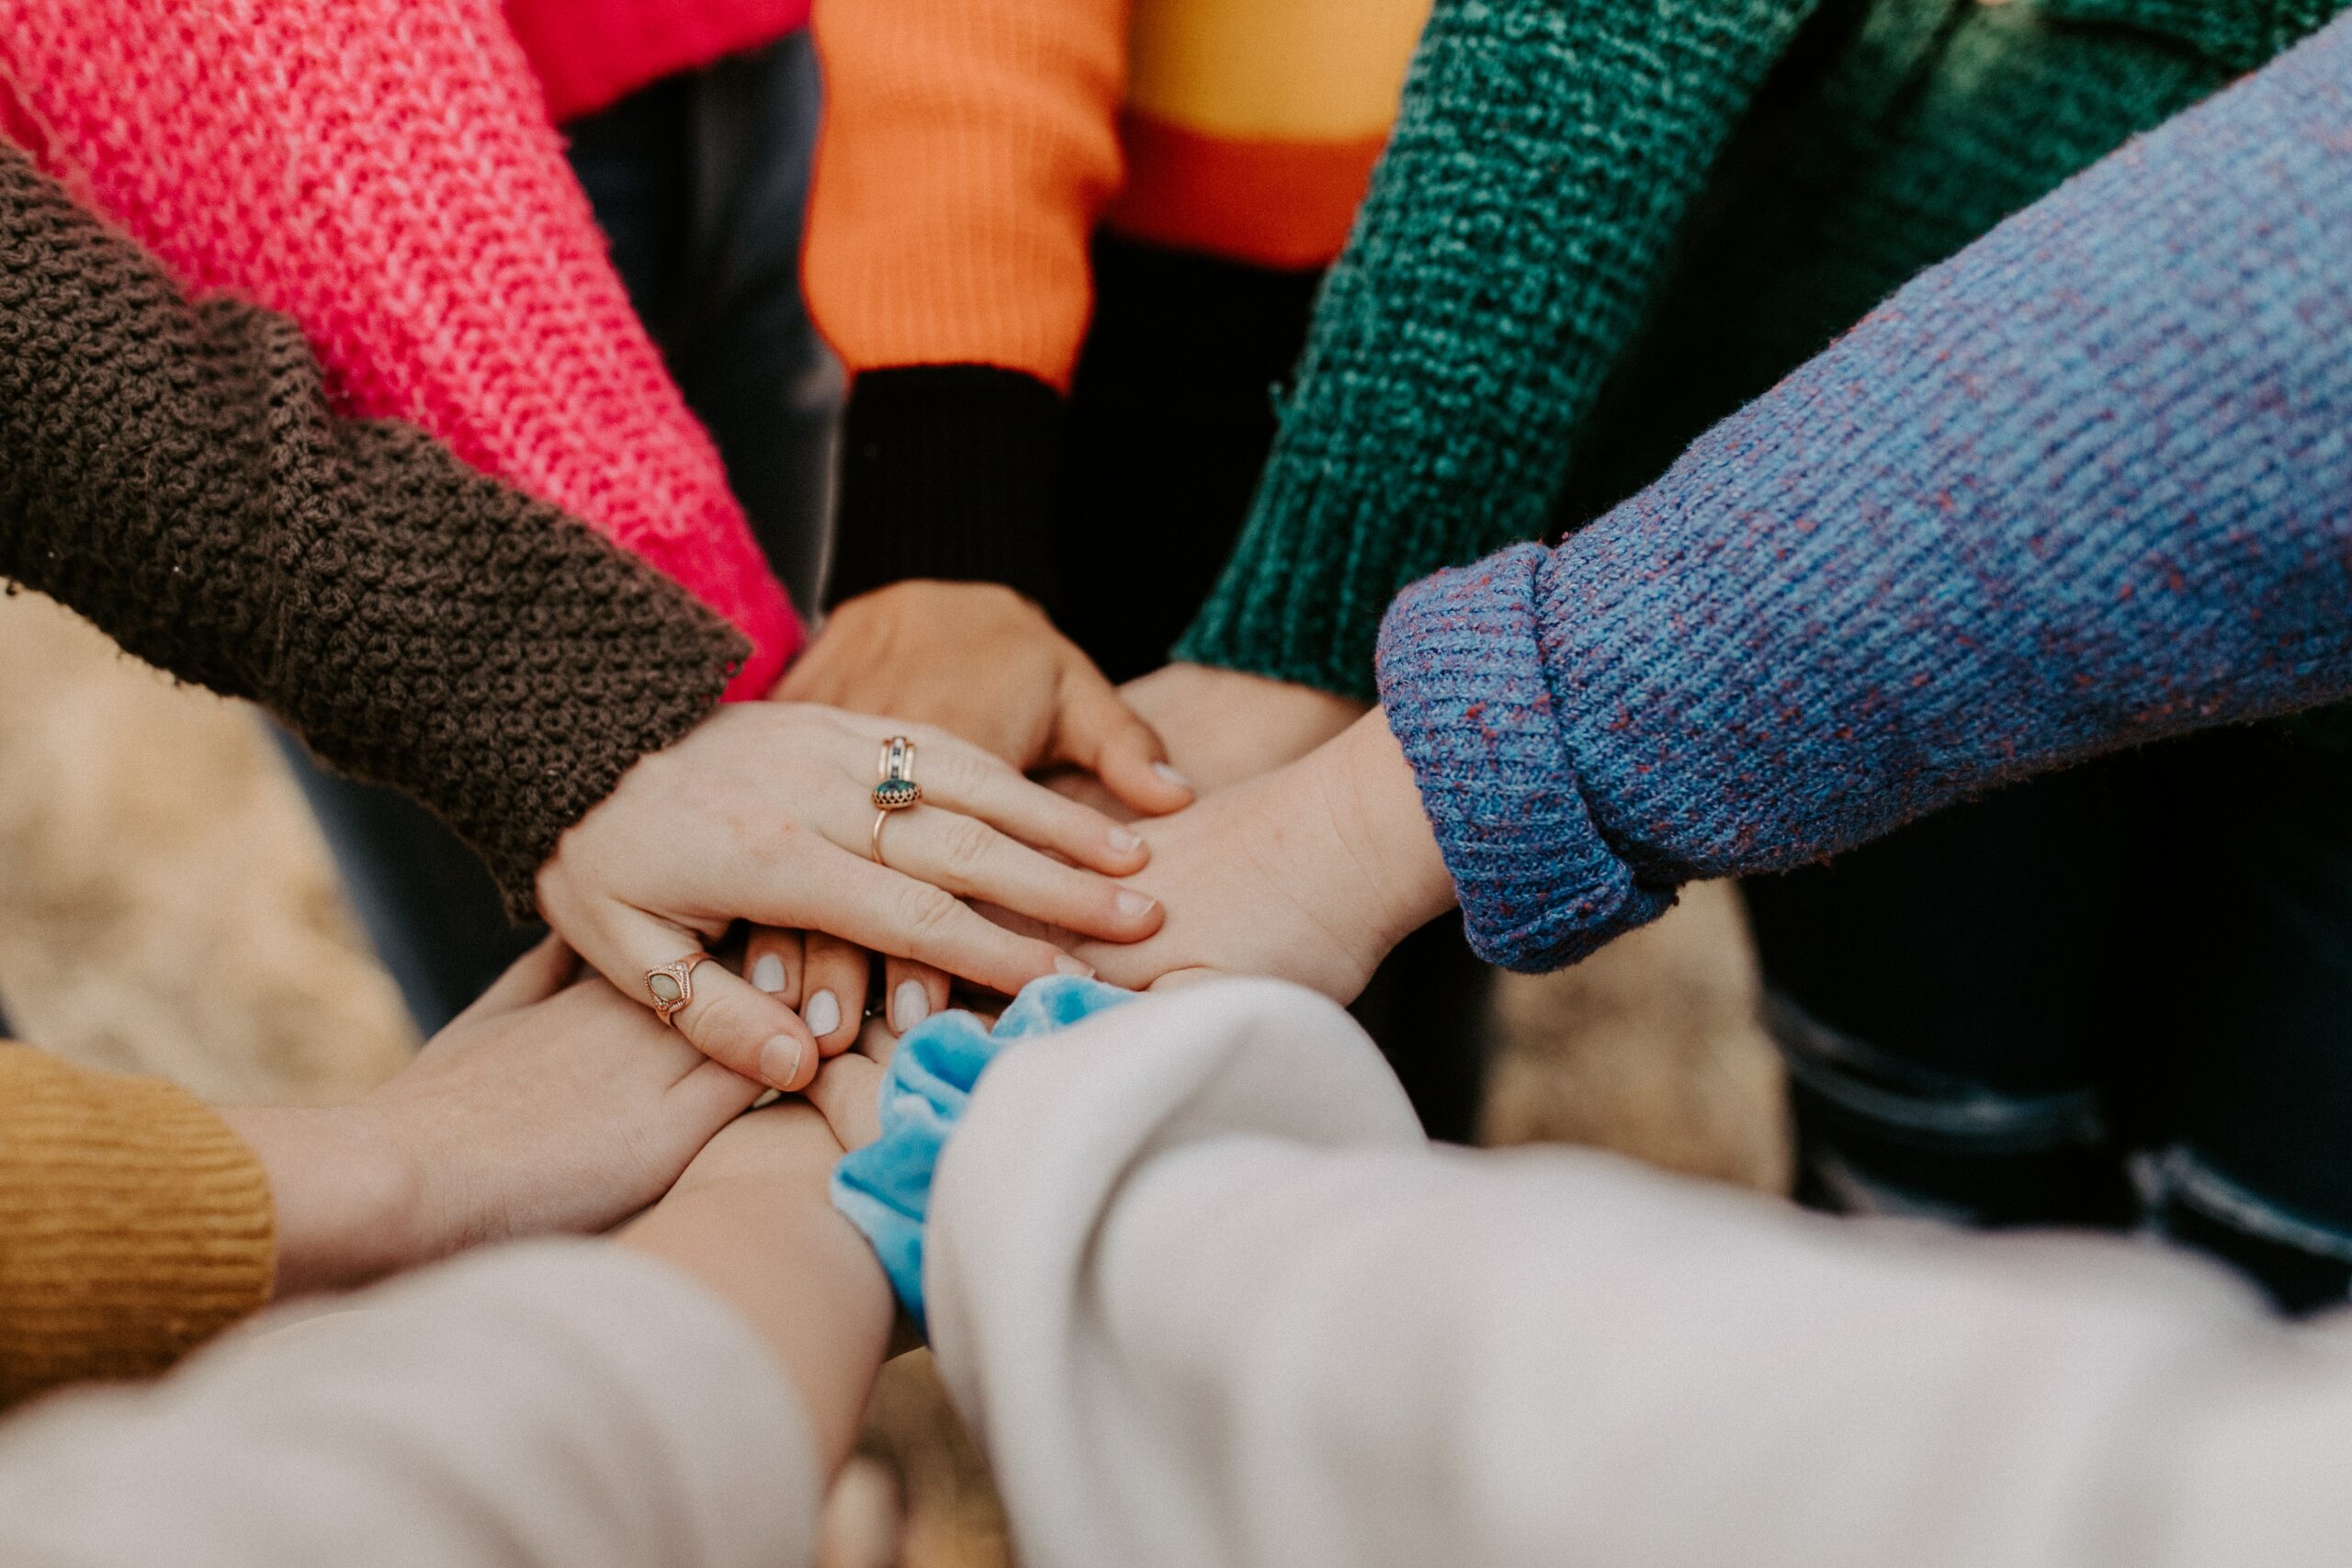 Stock photograph by Hannah Busing of a group of people's hands, placed one on top of the other to create a "go-team!" hand-stack.